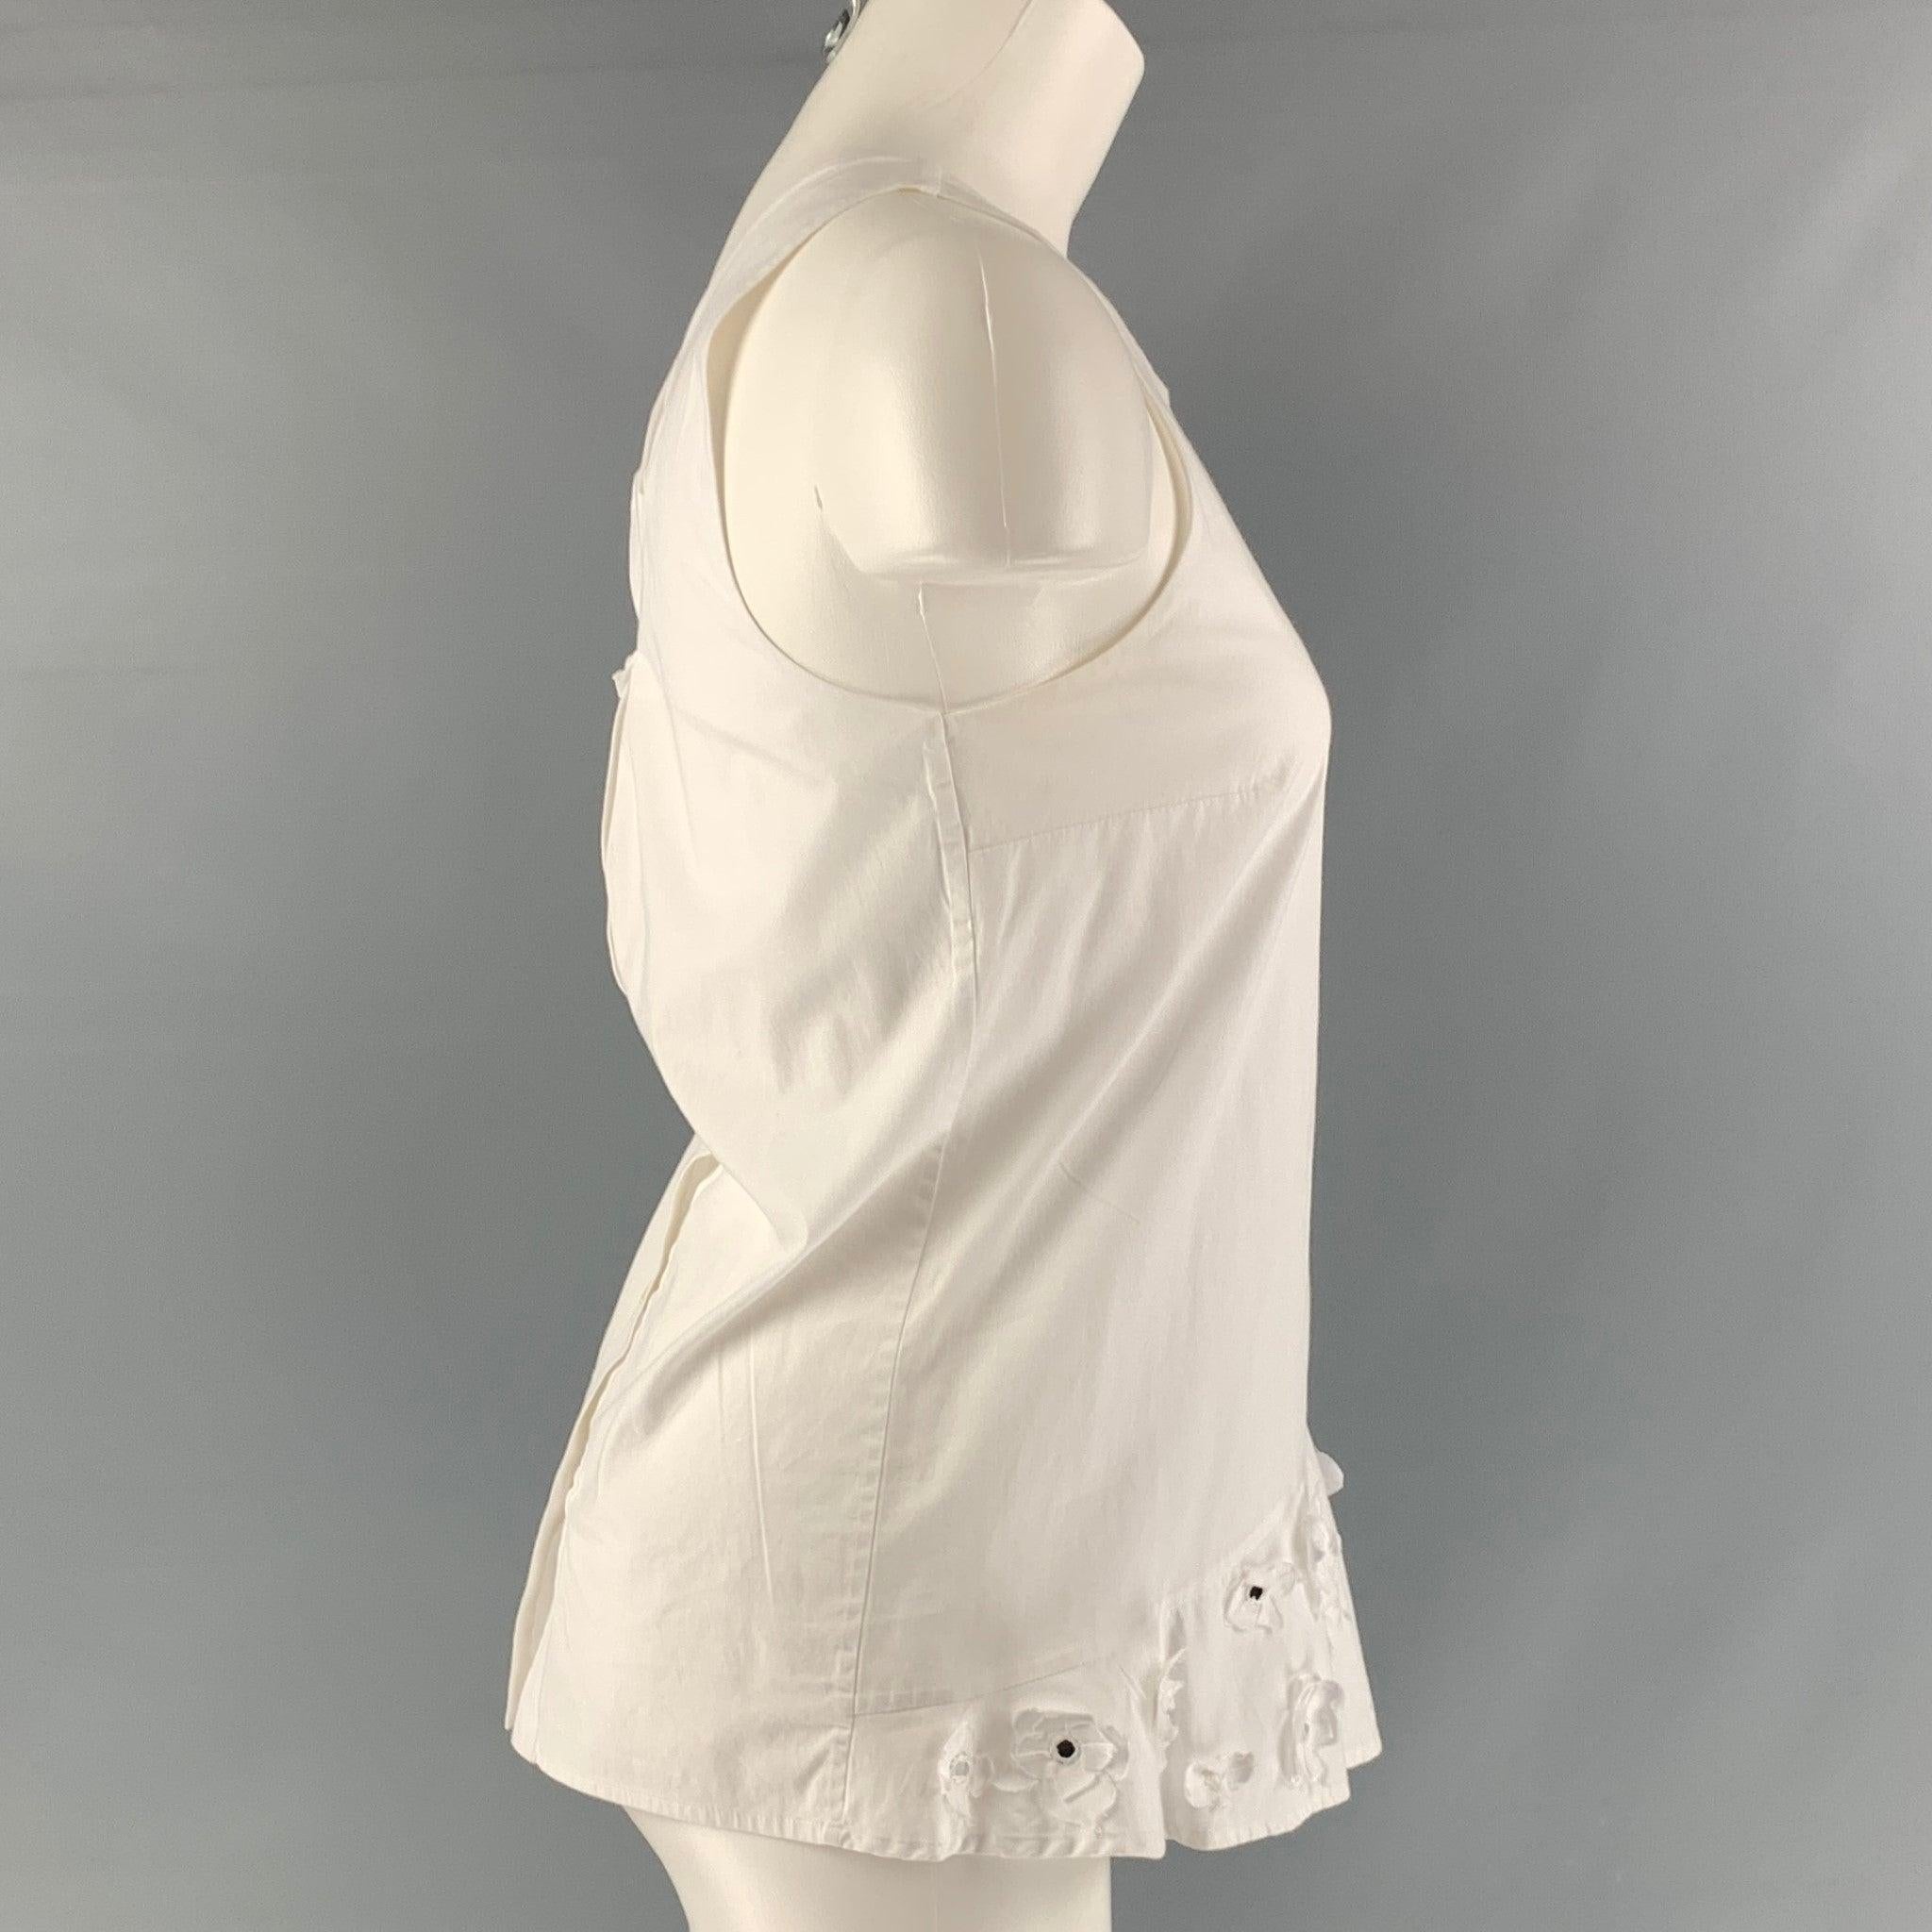 THAKOON sleeveless blouse comes in a white cotton blend poplin fabric featuring a sleeveless style and flowers detail at frontal hem.Very Good Pre-Owned Condition.  

Marked:   2 

Measurements: 
 
Shoulder: 10.5 inches Bust: 33 inches Length: 23